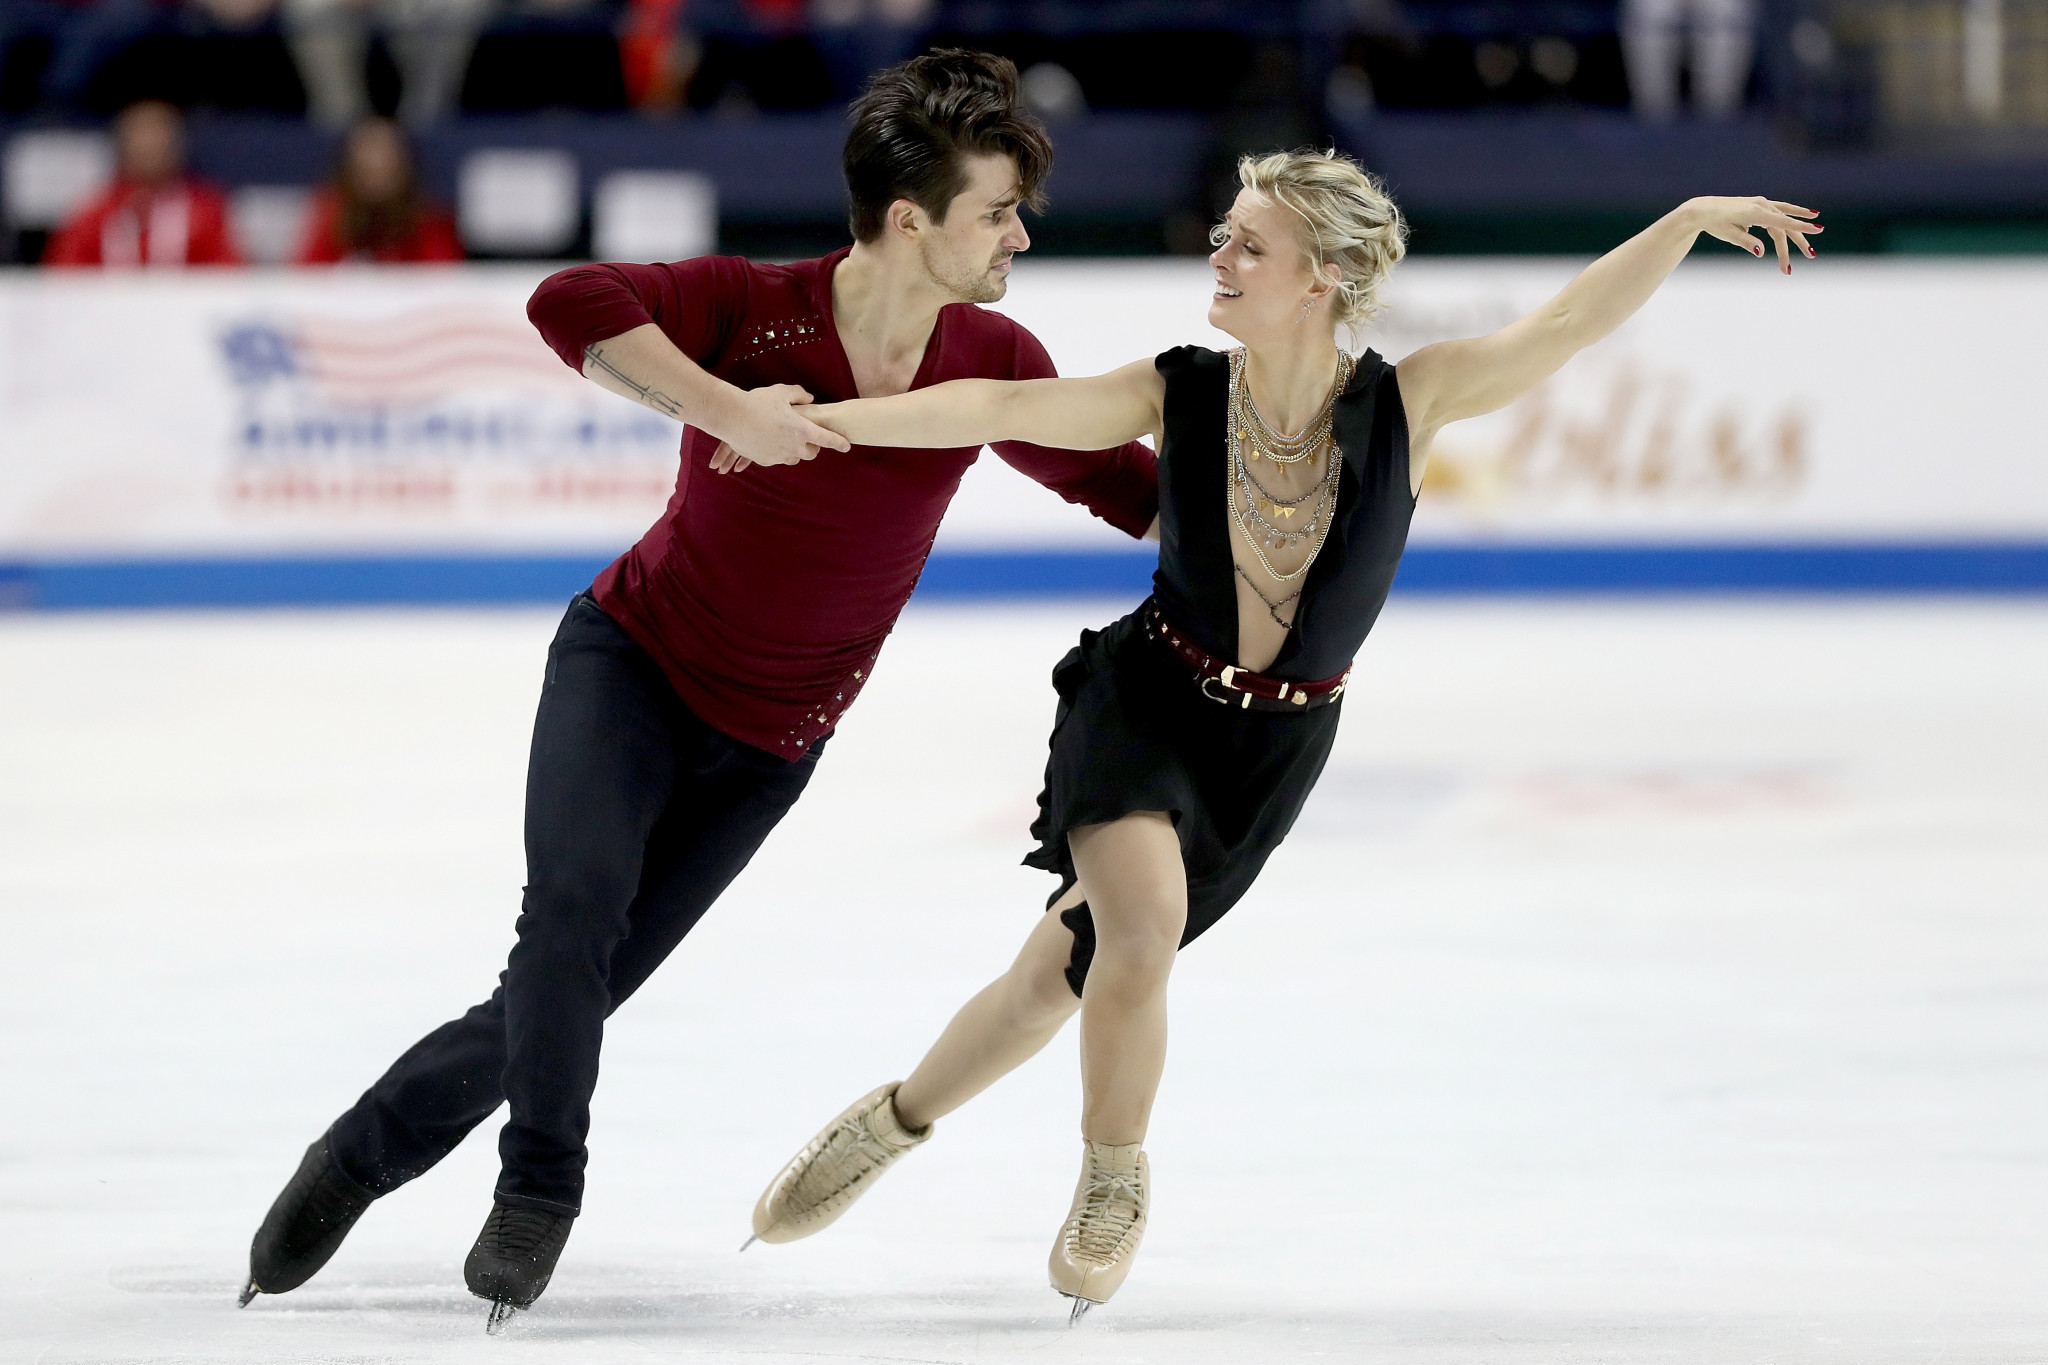 Madison Hubbell and Zachary Donohue are set to take part in the I.AM LIVE show ©Getty Images